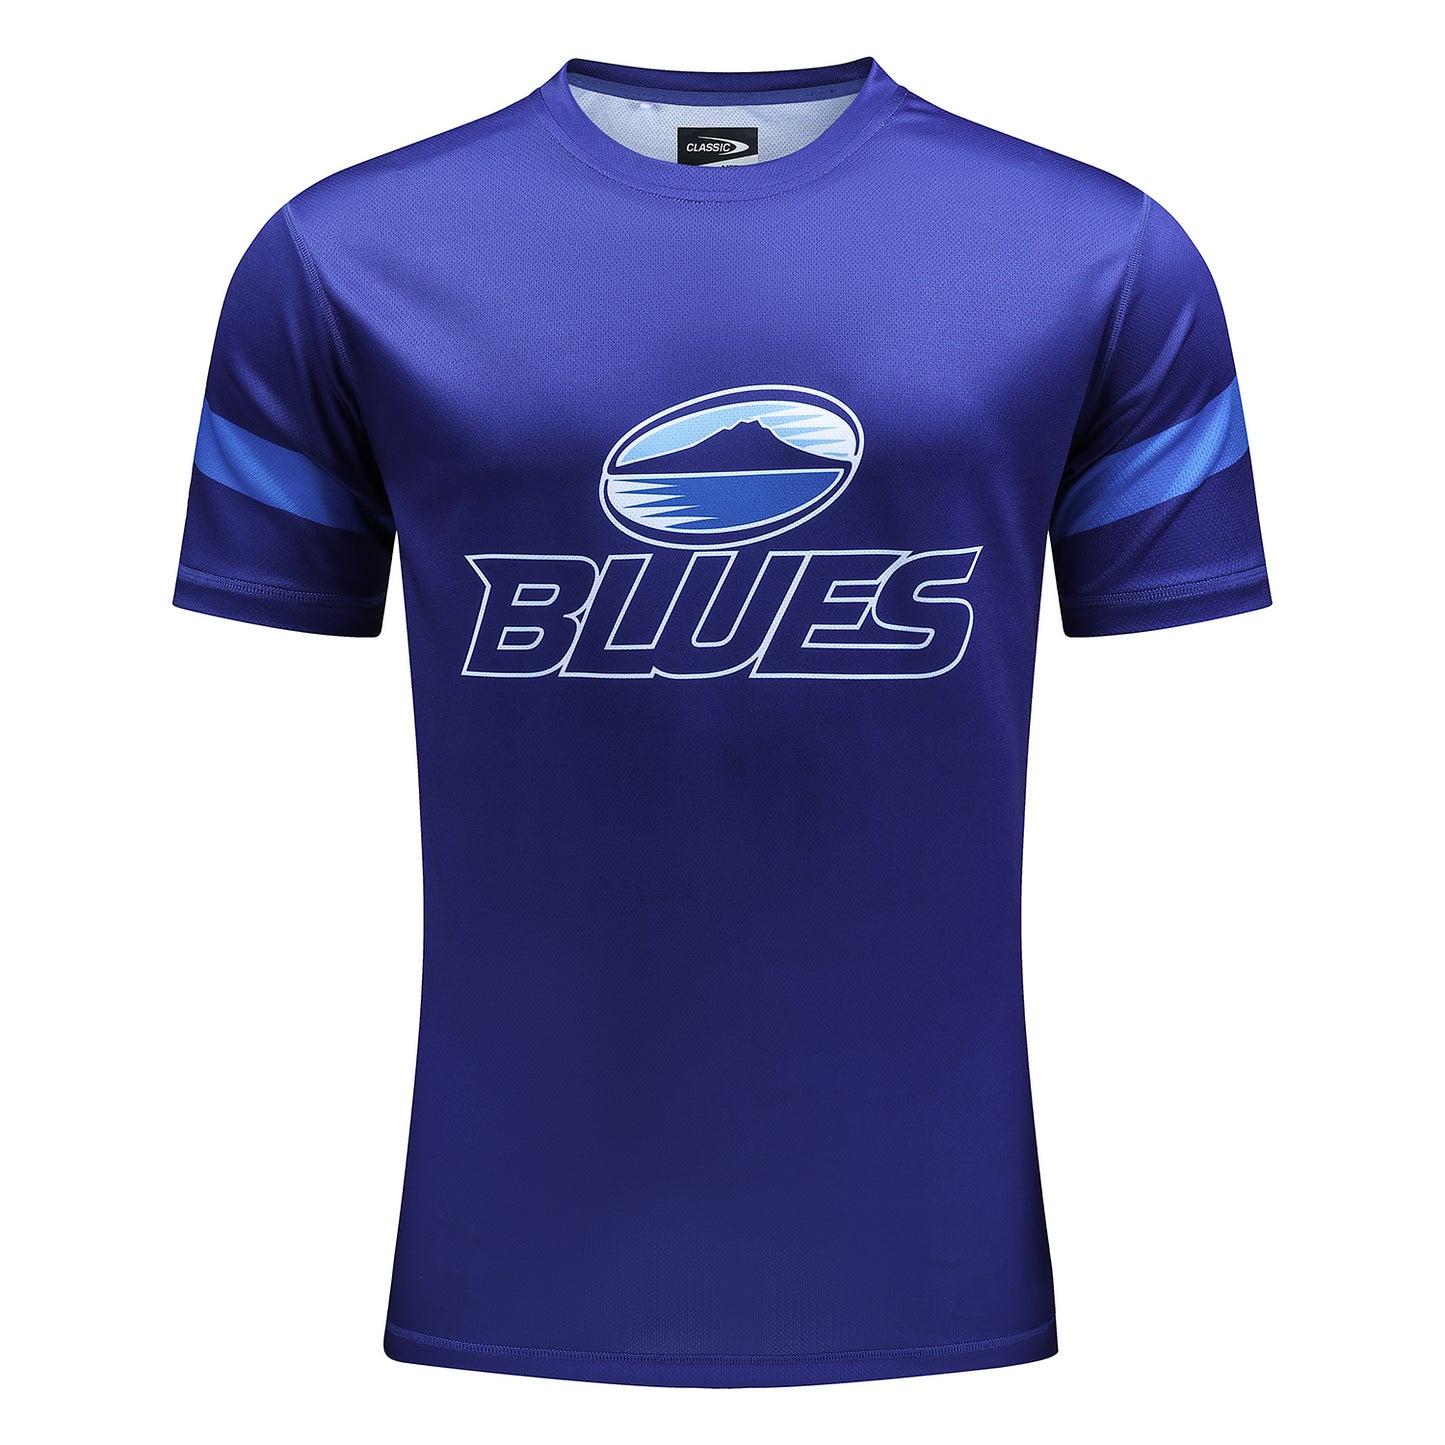 Blues Mens Supporter Tee